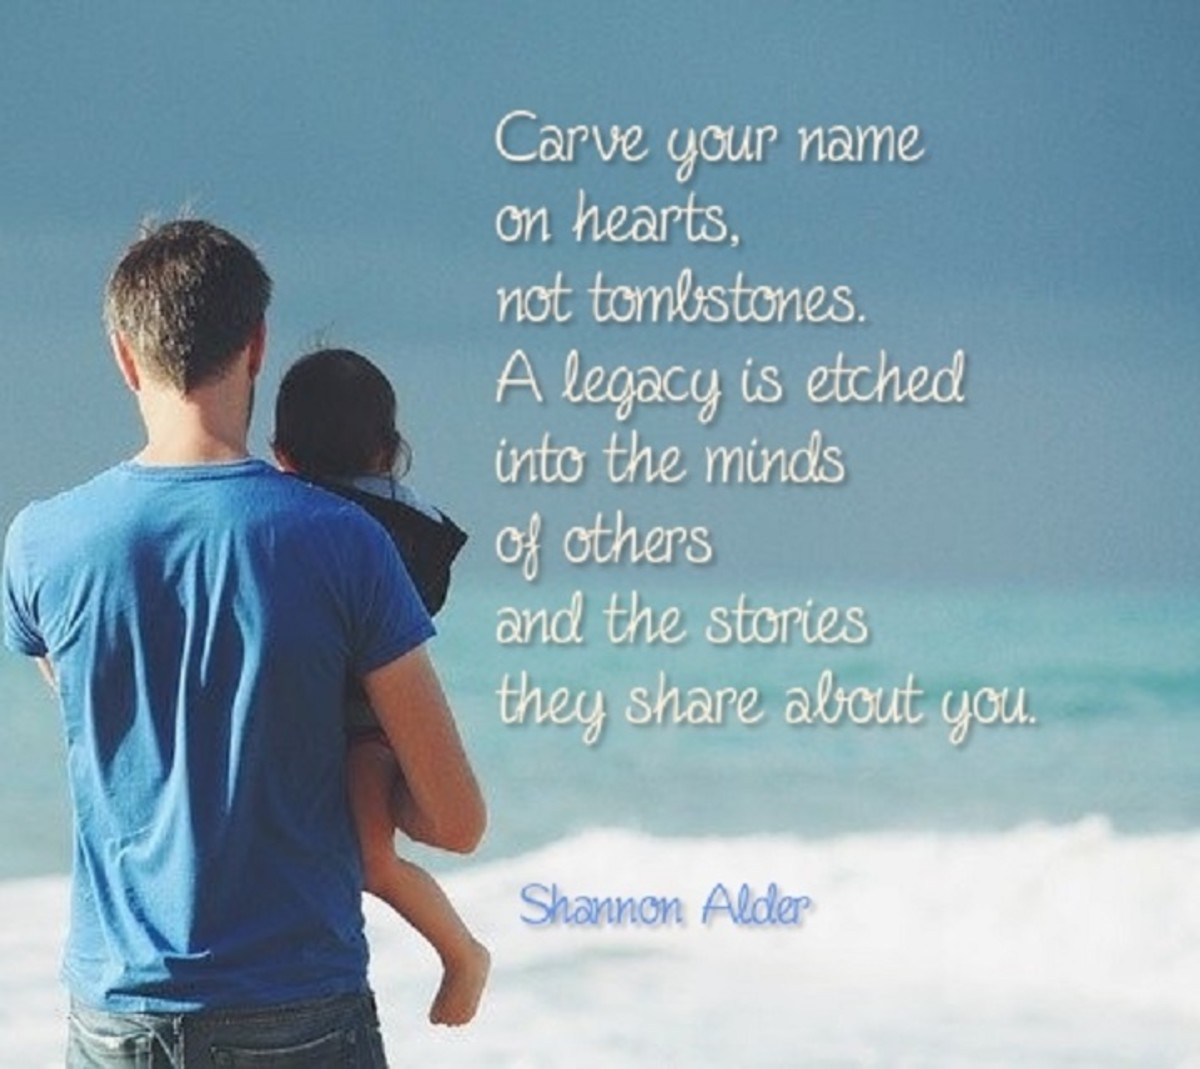 Carve your name on hearts, not tombstones. A legacy is etched into the minds... 